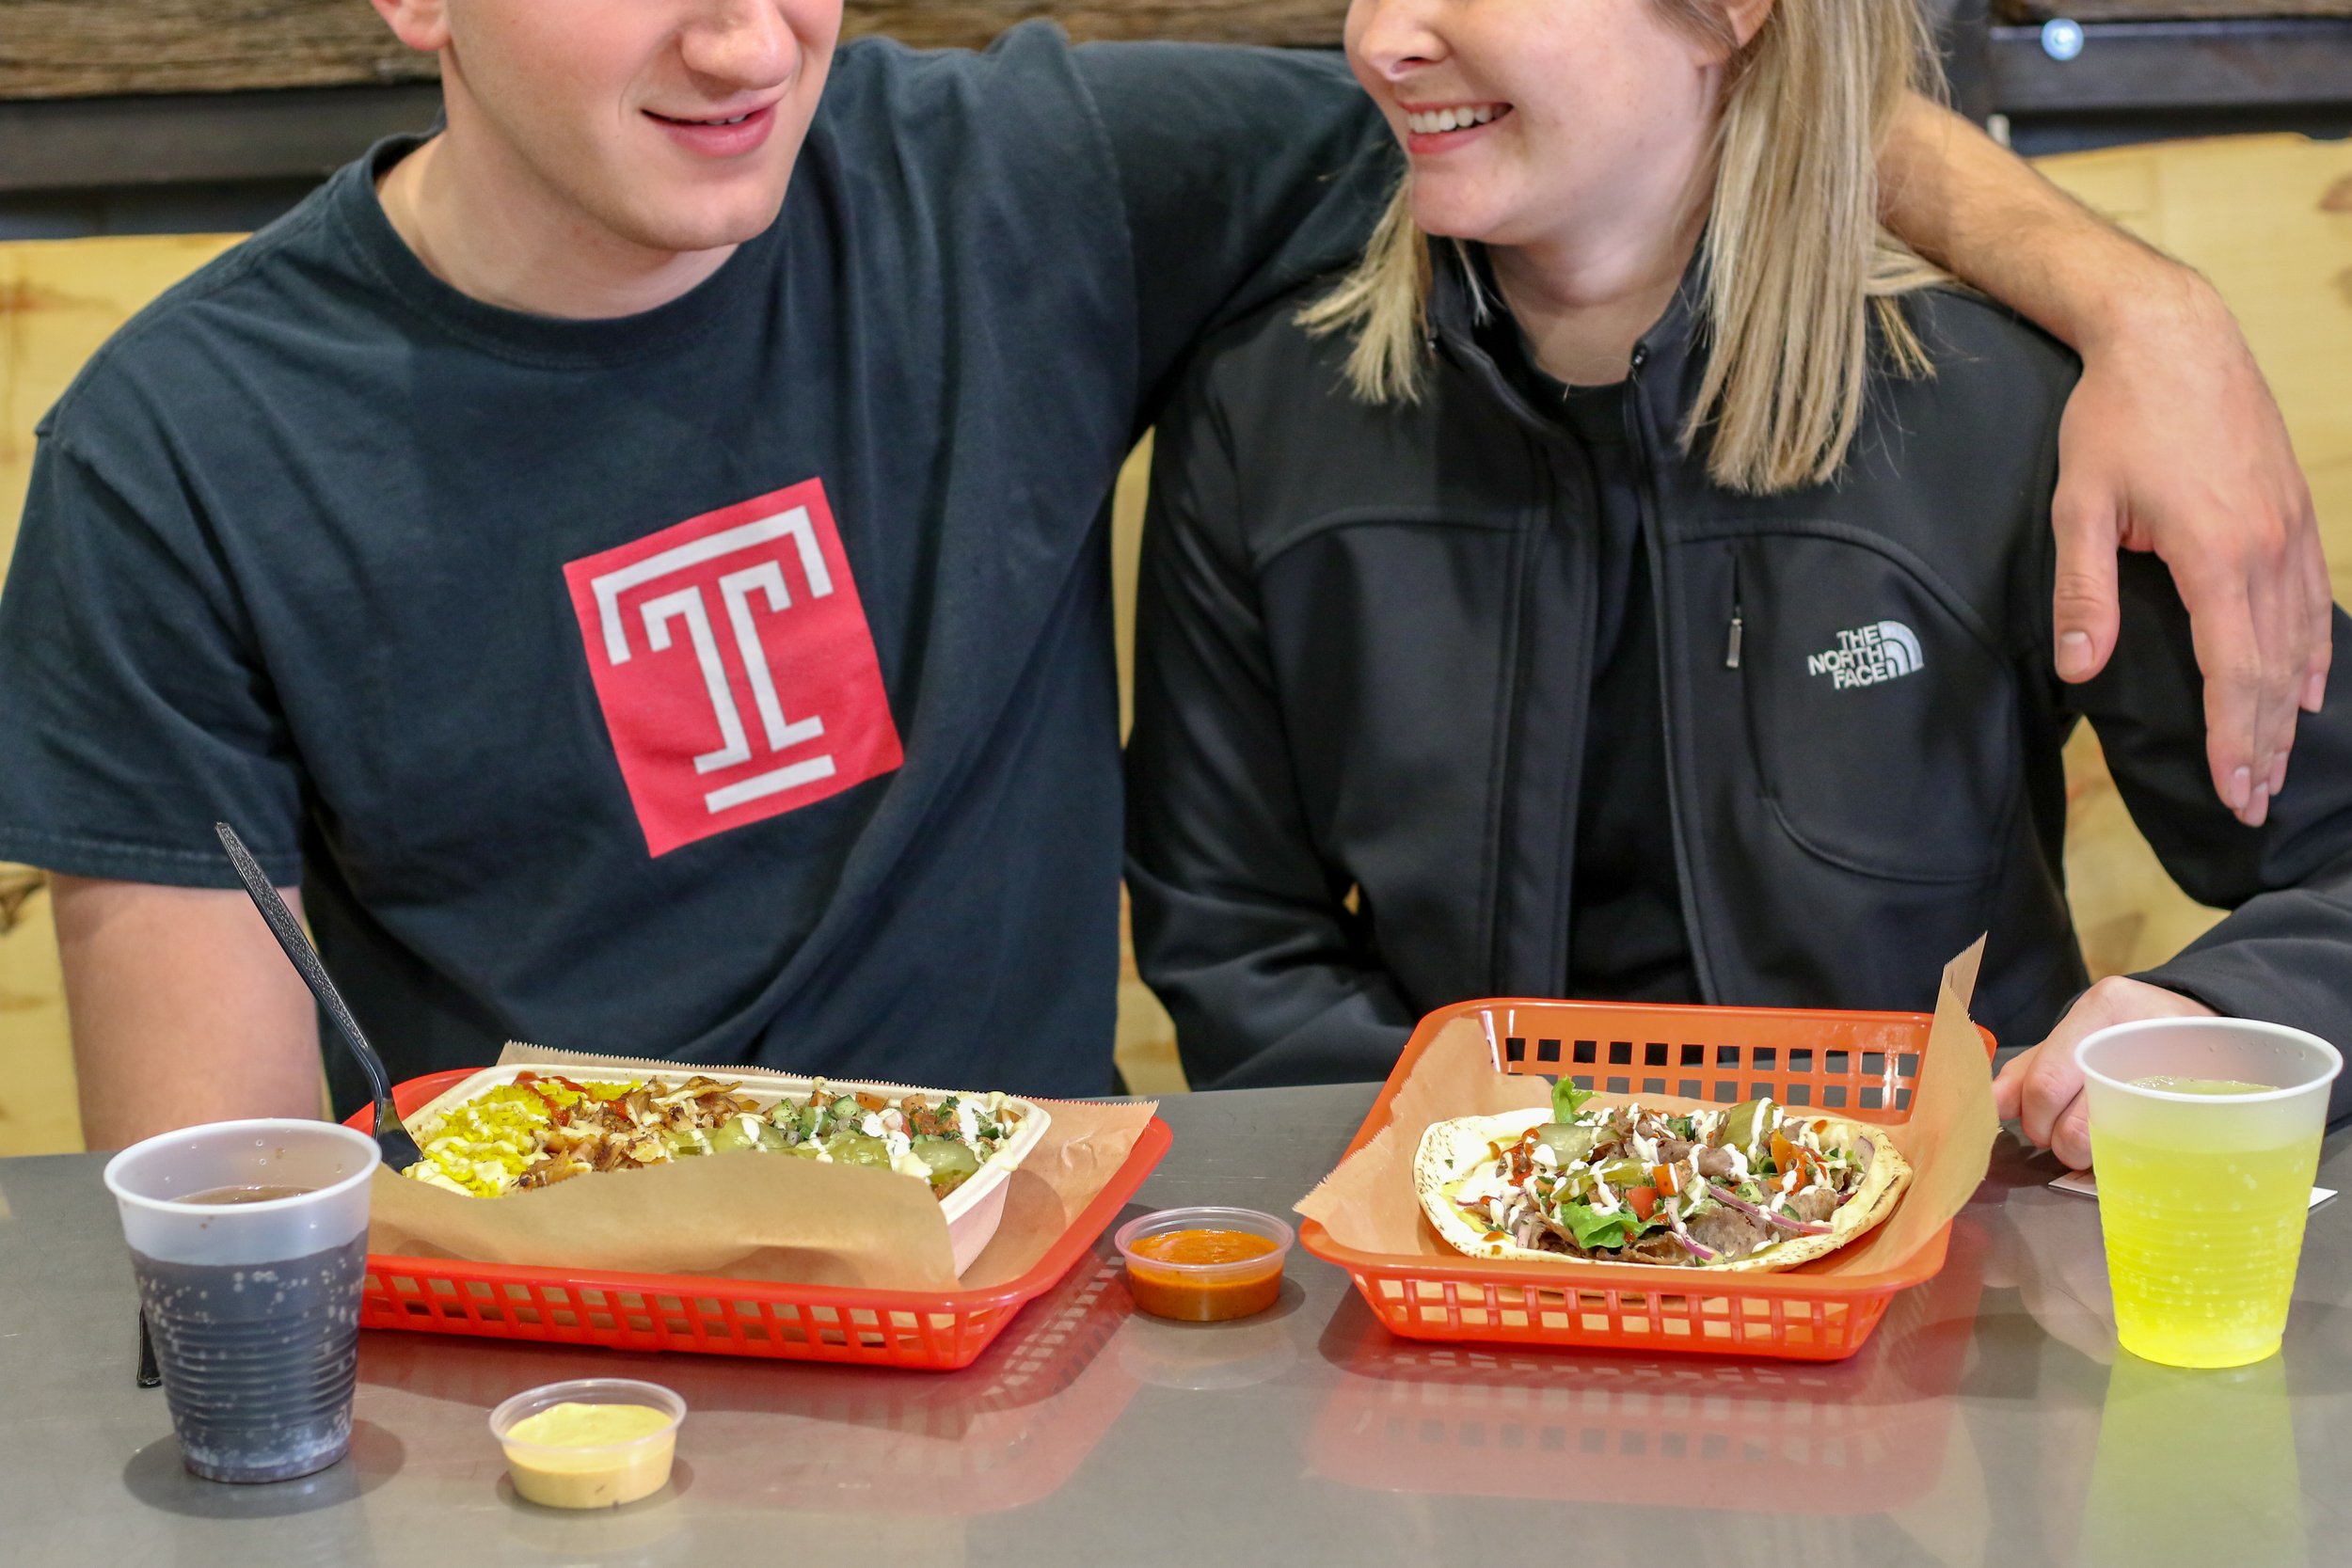 Alt text: two young white students sit together at lunch. One person wears a black and red temple university tshirt and drapes his arm over the other person who is wearing a black fleece jacket. In fr